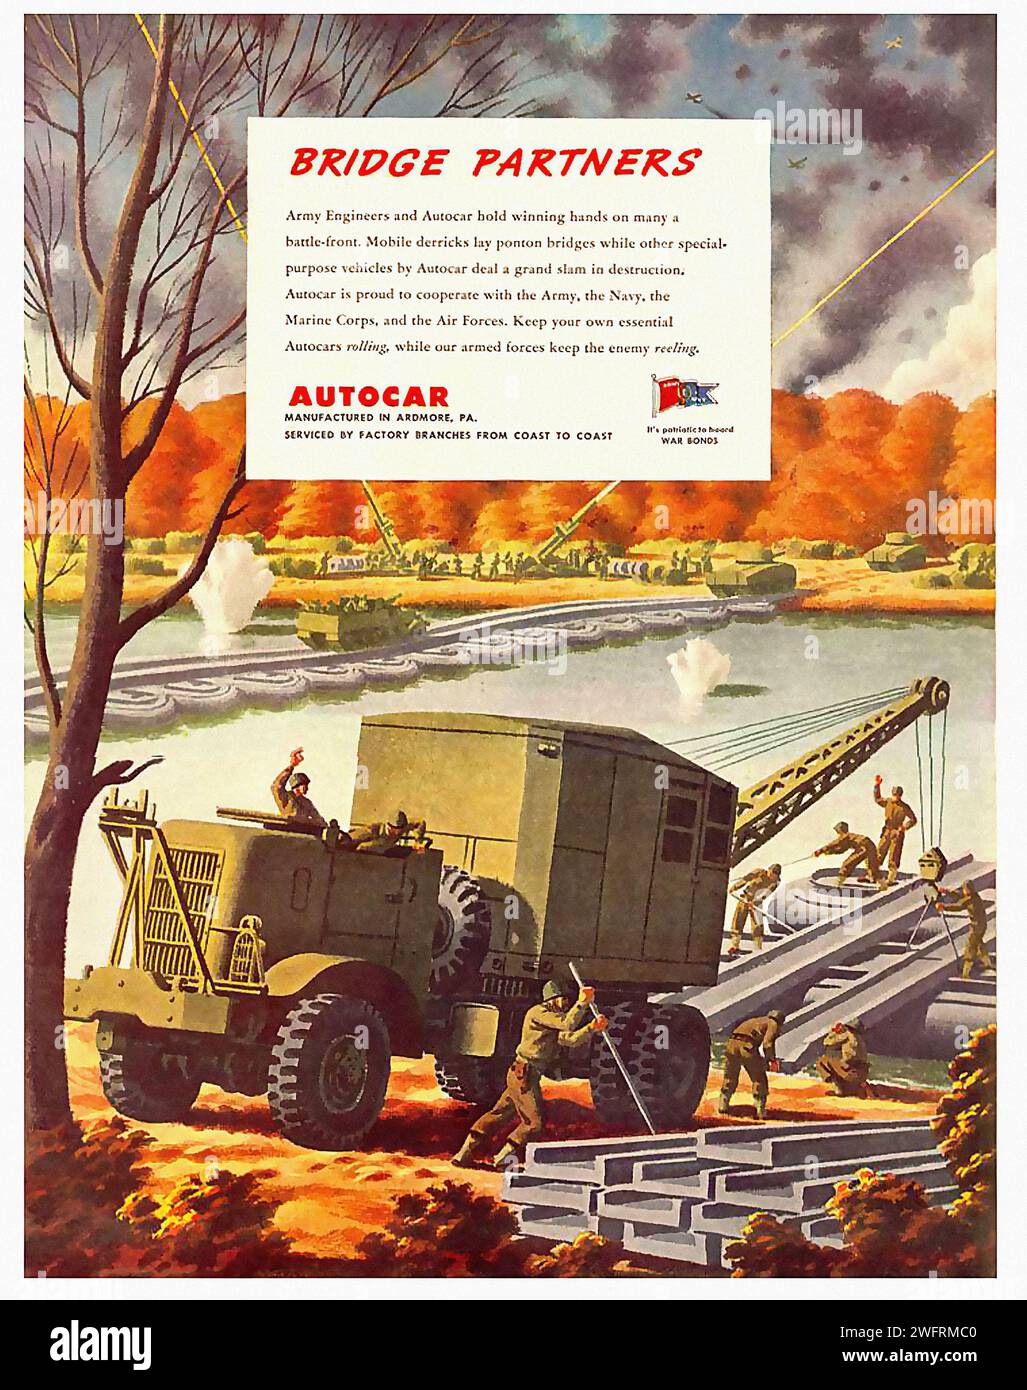 “ARMY ENGINEERS BRIDGE BUILDING BANKS ON AUTOCAR TRUCKS! AUTOCAR TRUCKS - WITH THEIR POWERFUL ENGINES - ARE THE ONLY VEHICLES CAPABLE OF HANDLING THE HEAVY LOADS NECESSARY FOR BRIDGE BUILDING. AMERICA’S FIGHTING MEN KNOW THEY CAN DEPEND ON AUTOCAR TRUCKS - WHETHER IN THE ARMY, NAVY, OR MARINES. AUTOCAR TRUCKS - BUILT FOR VICTORY! FROM COAST TO COAST - AUTOCAR IS KNOWN BY INDUSTRY’S LEADERS.”  This is a vintage advertisement from the World War II era for Autocar Trucks, an American company. The advertisement features a green Autocar truck with a crane attachment, situated on a dirt road with so Stock Photo